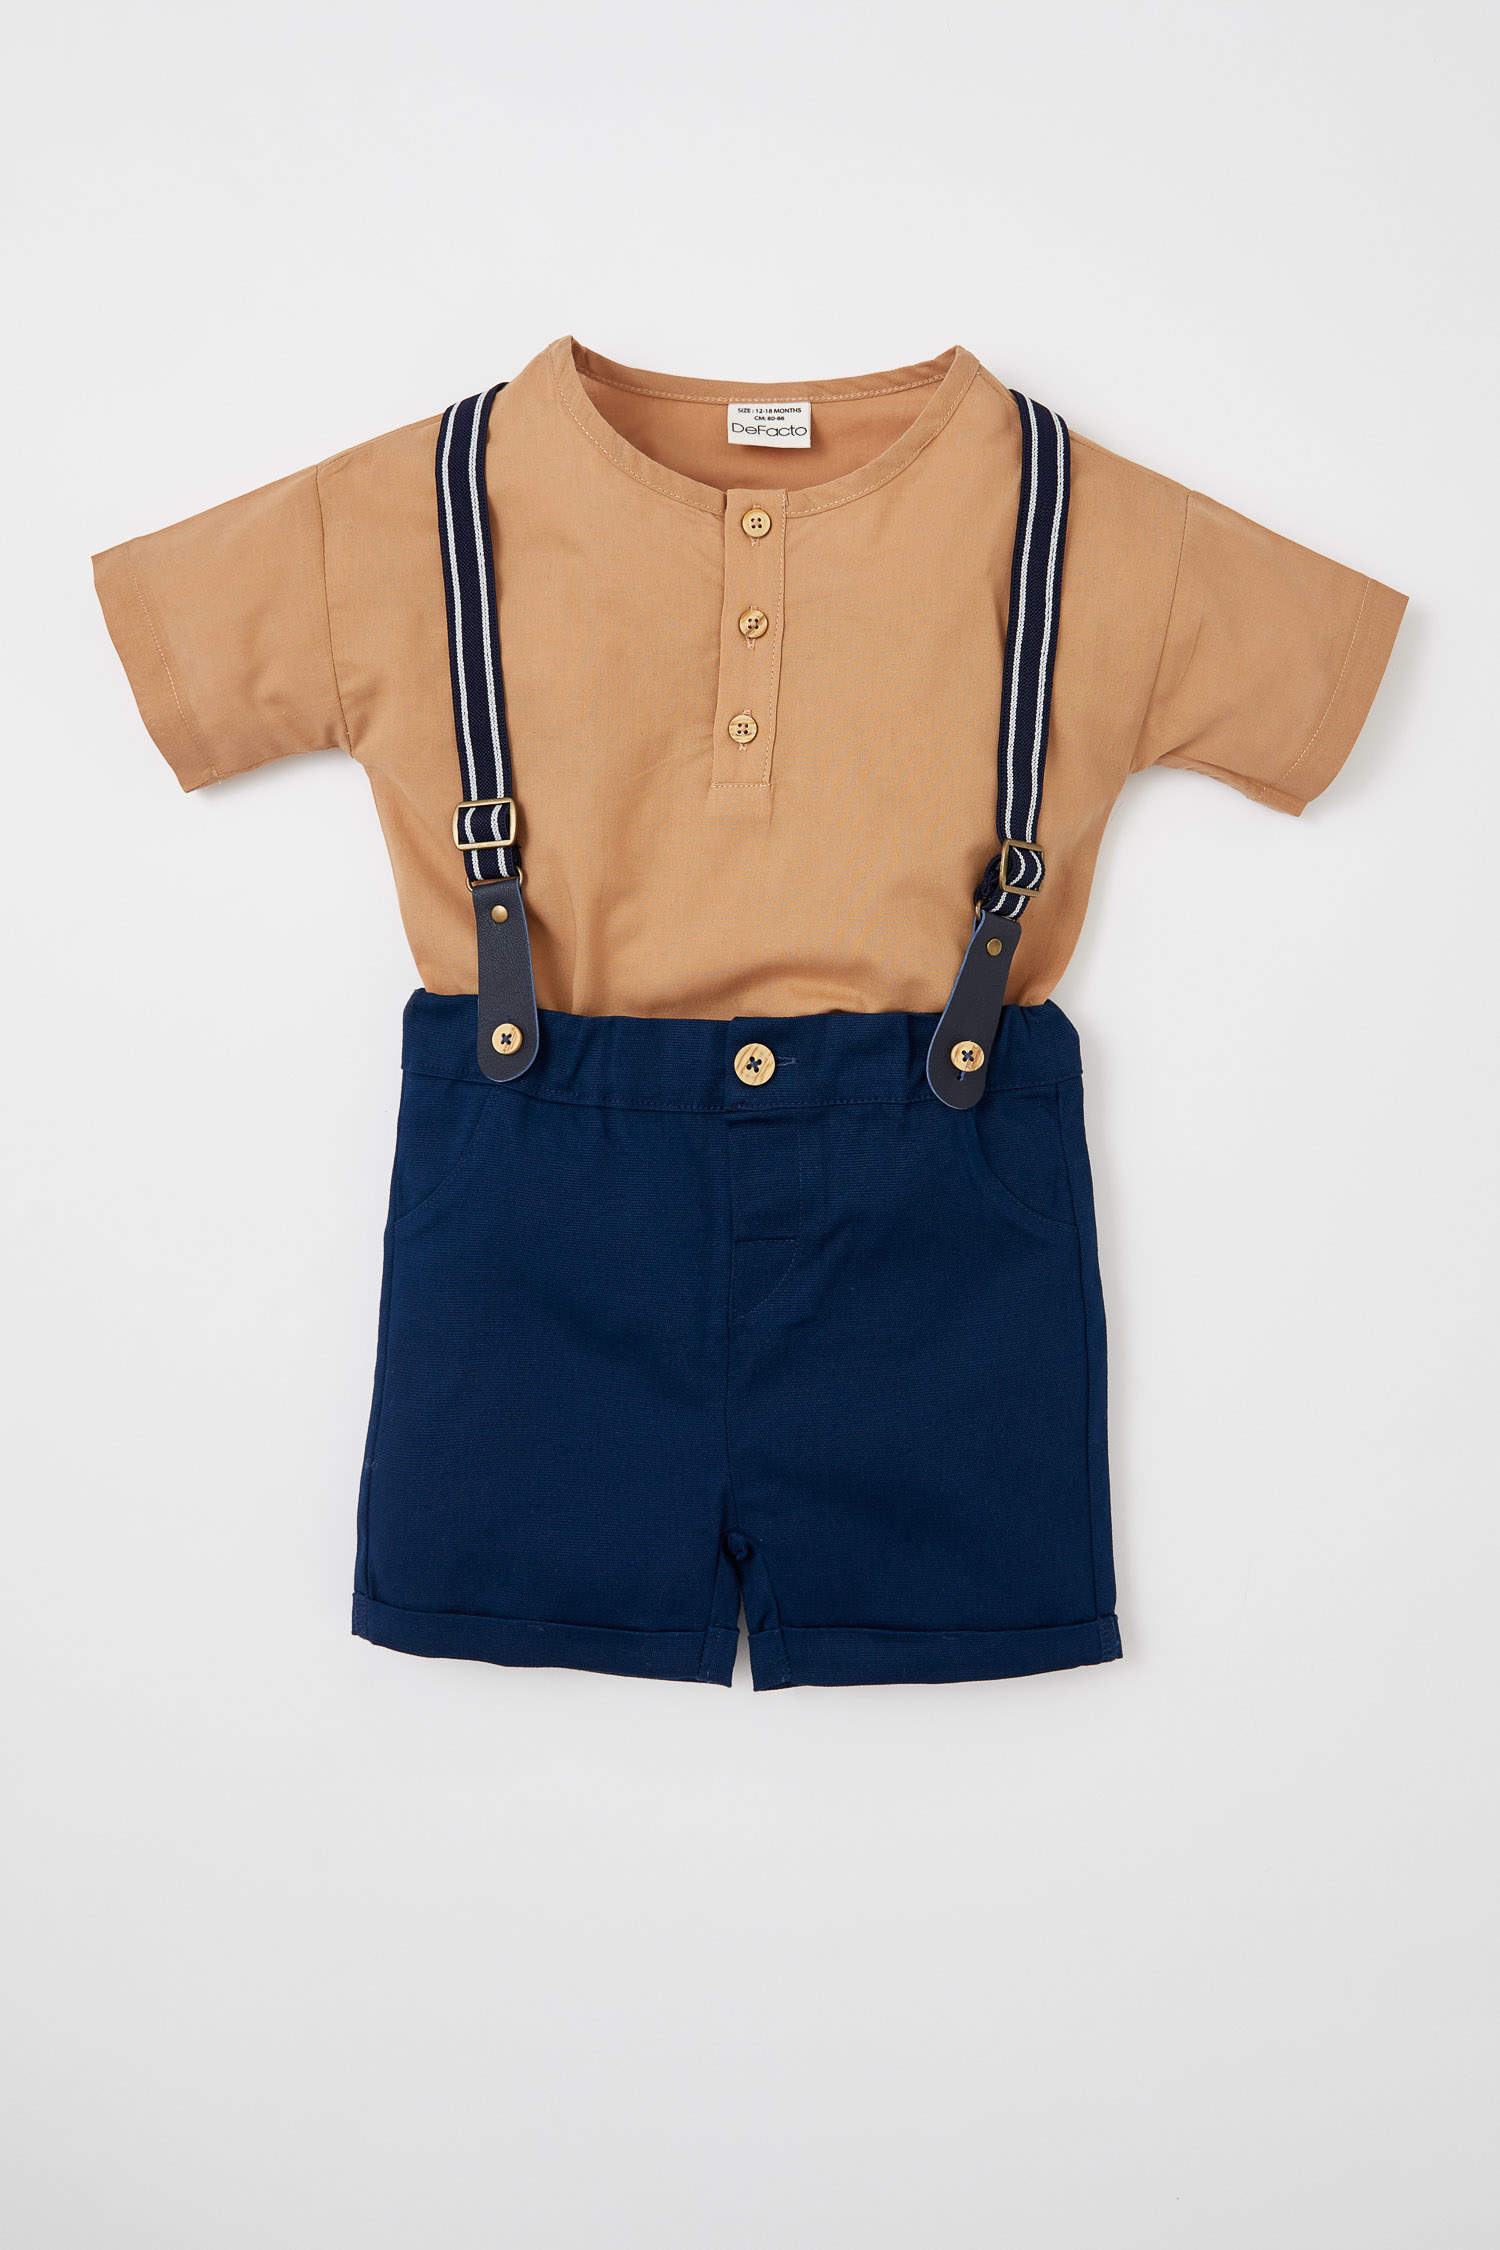 Buy Shirt with Pants  Suspenders Set Online at Best Prices in India   JioMart